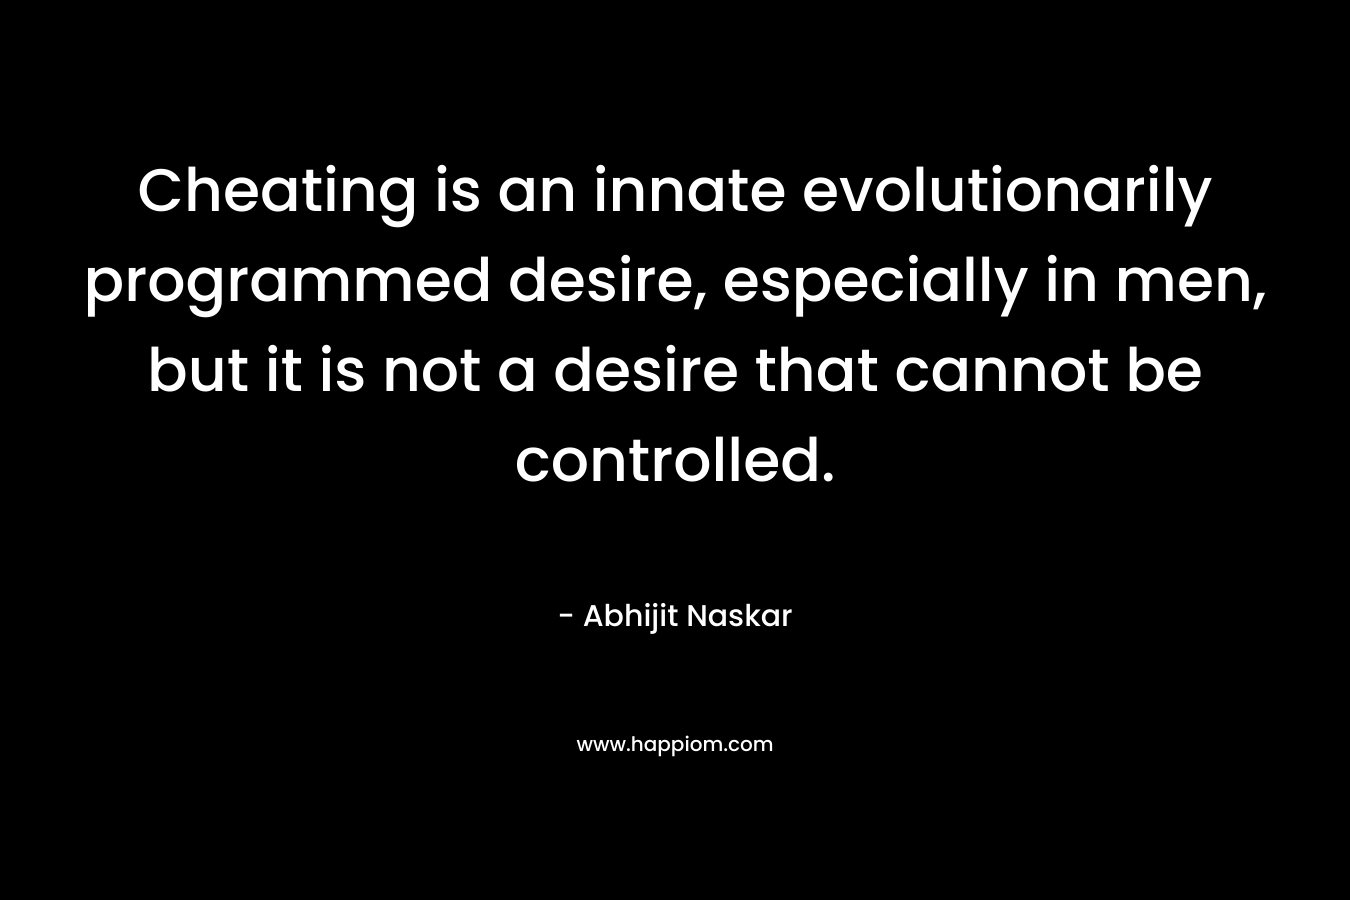 Cheating is an innate evolutionarily programmed desire, especially in men, but it is not a desire that cannot be controlled. – Abhijit Naskar